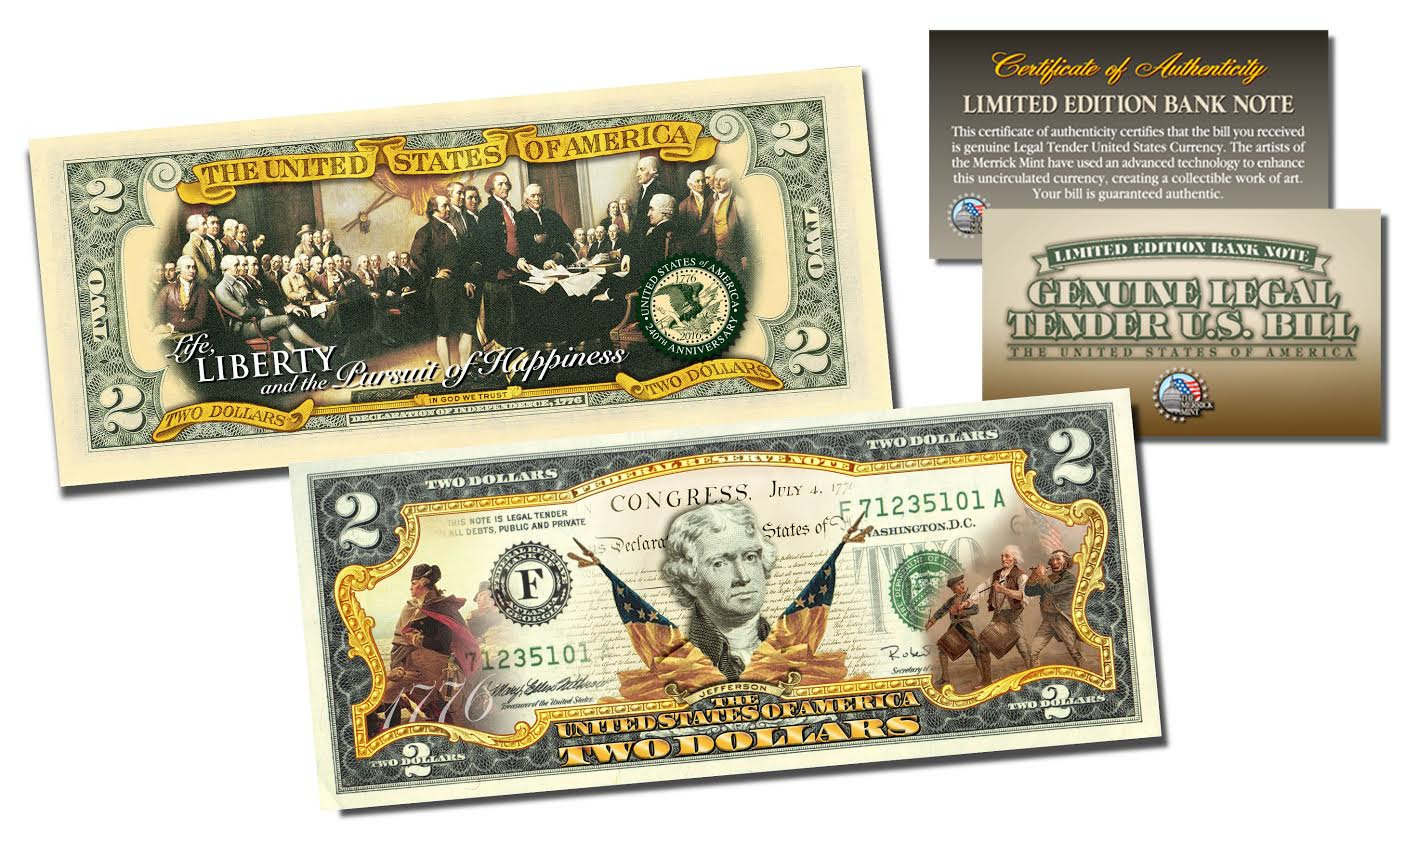 1776-2016 DECLARATION OF INDEPENDENCE * 240th ANNIV * Genuine US $2 Bill 2-SIDED